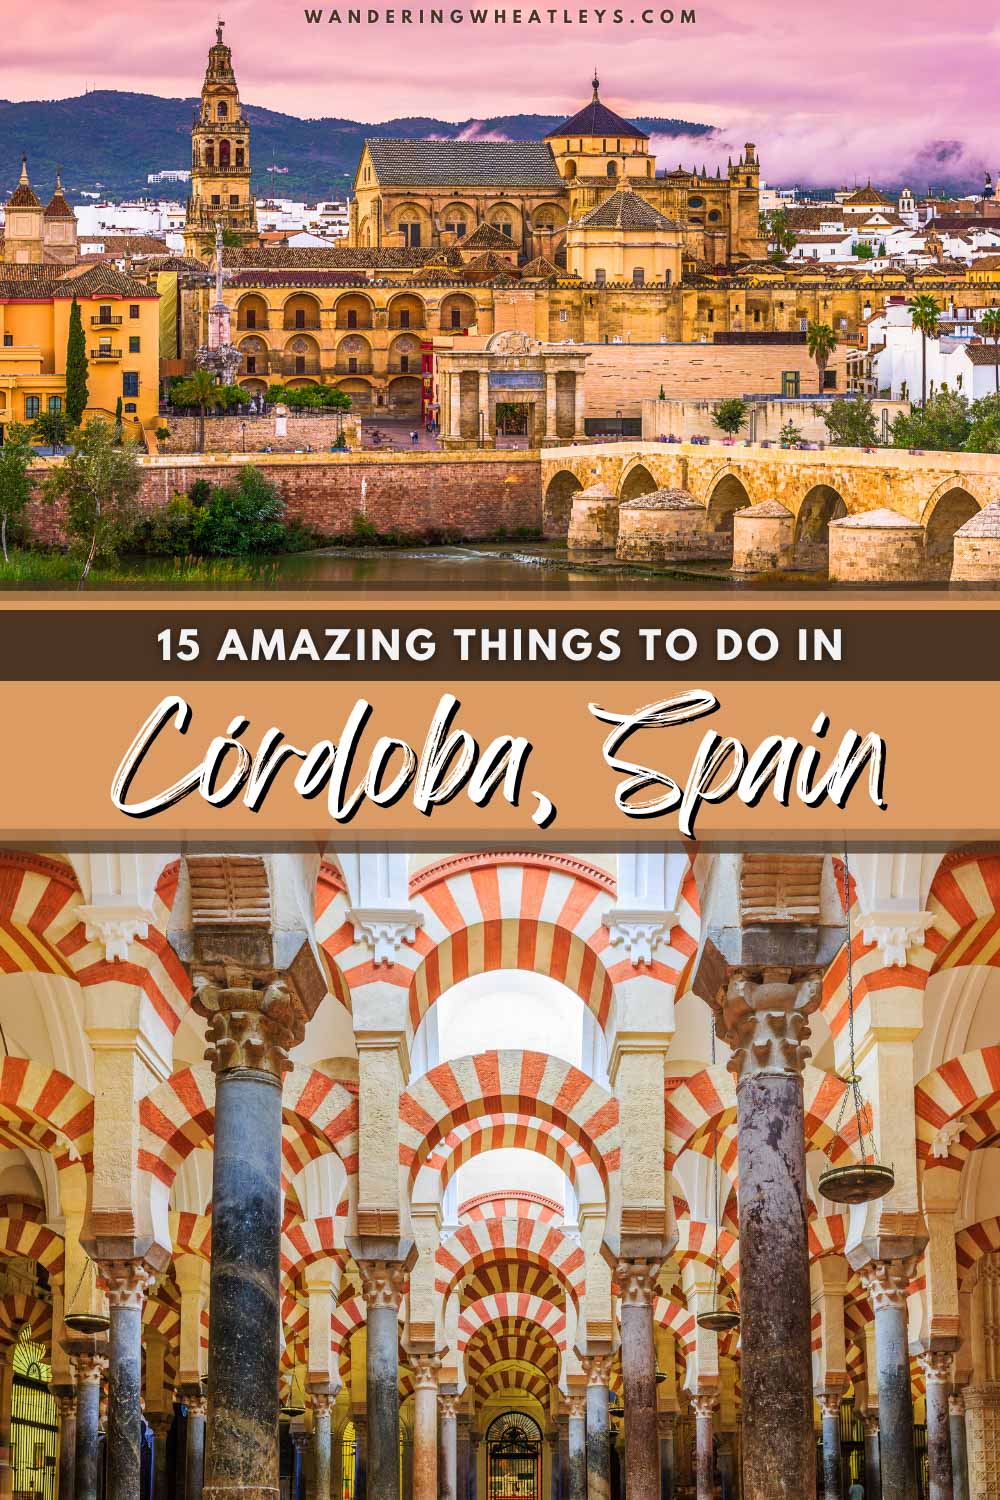 The Best Things to do in Cordoba, Spain